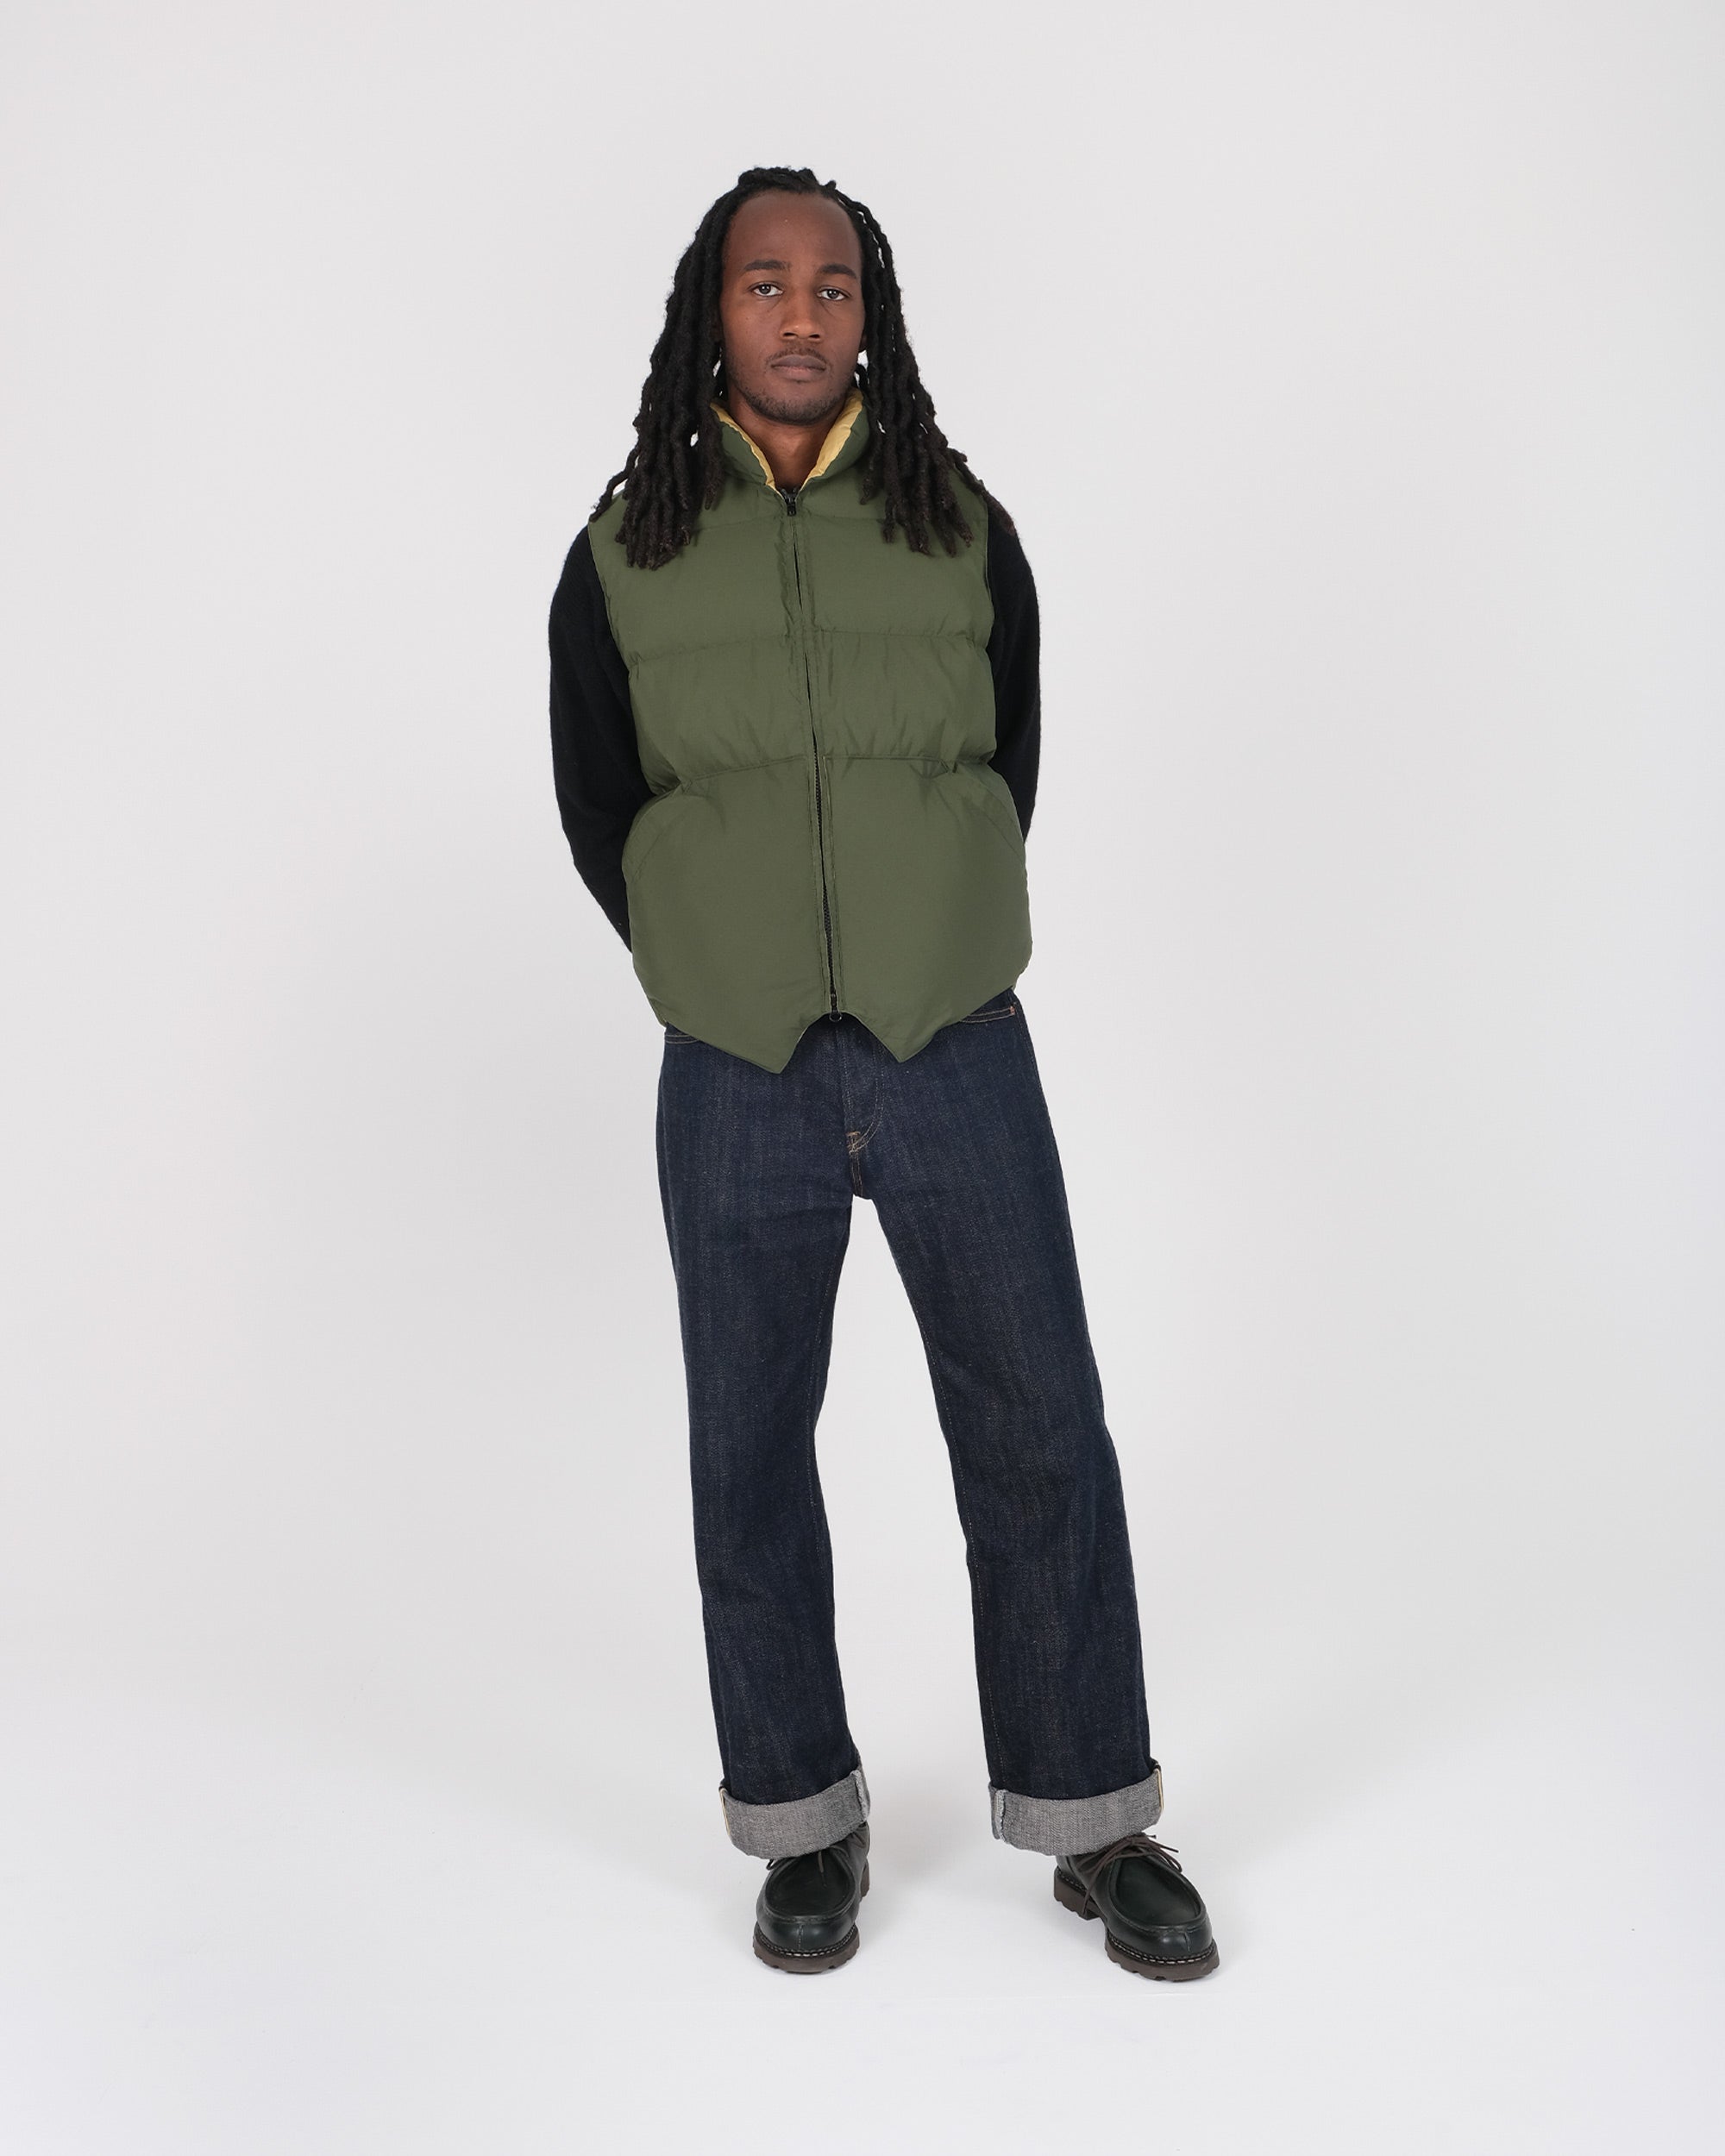 Model wearing the Crescent Down Works "Green" colorway of the North by Northwest vest. 